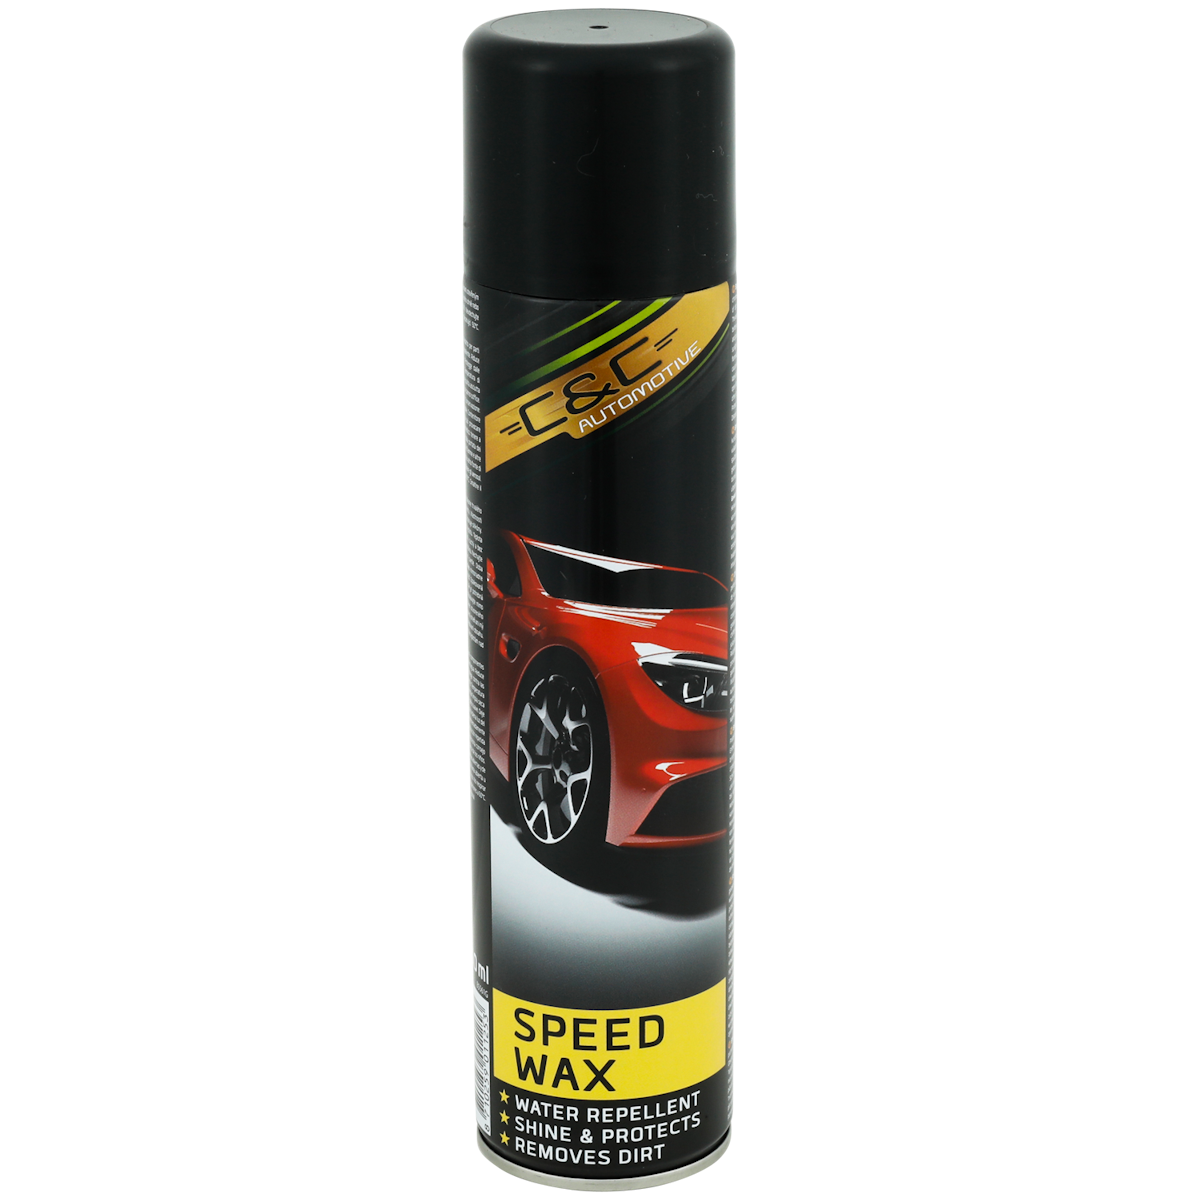 C&C Speedwax Car Products